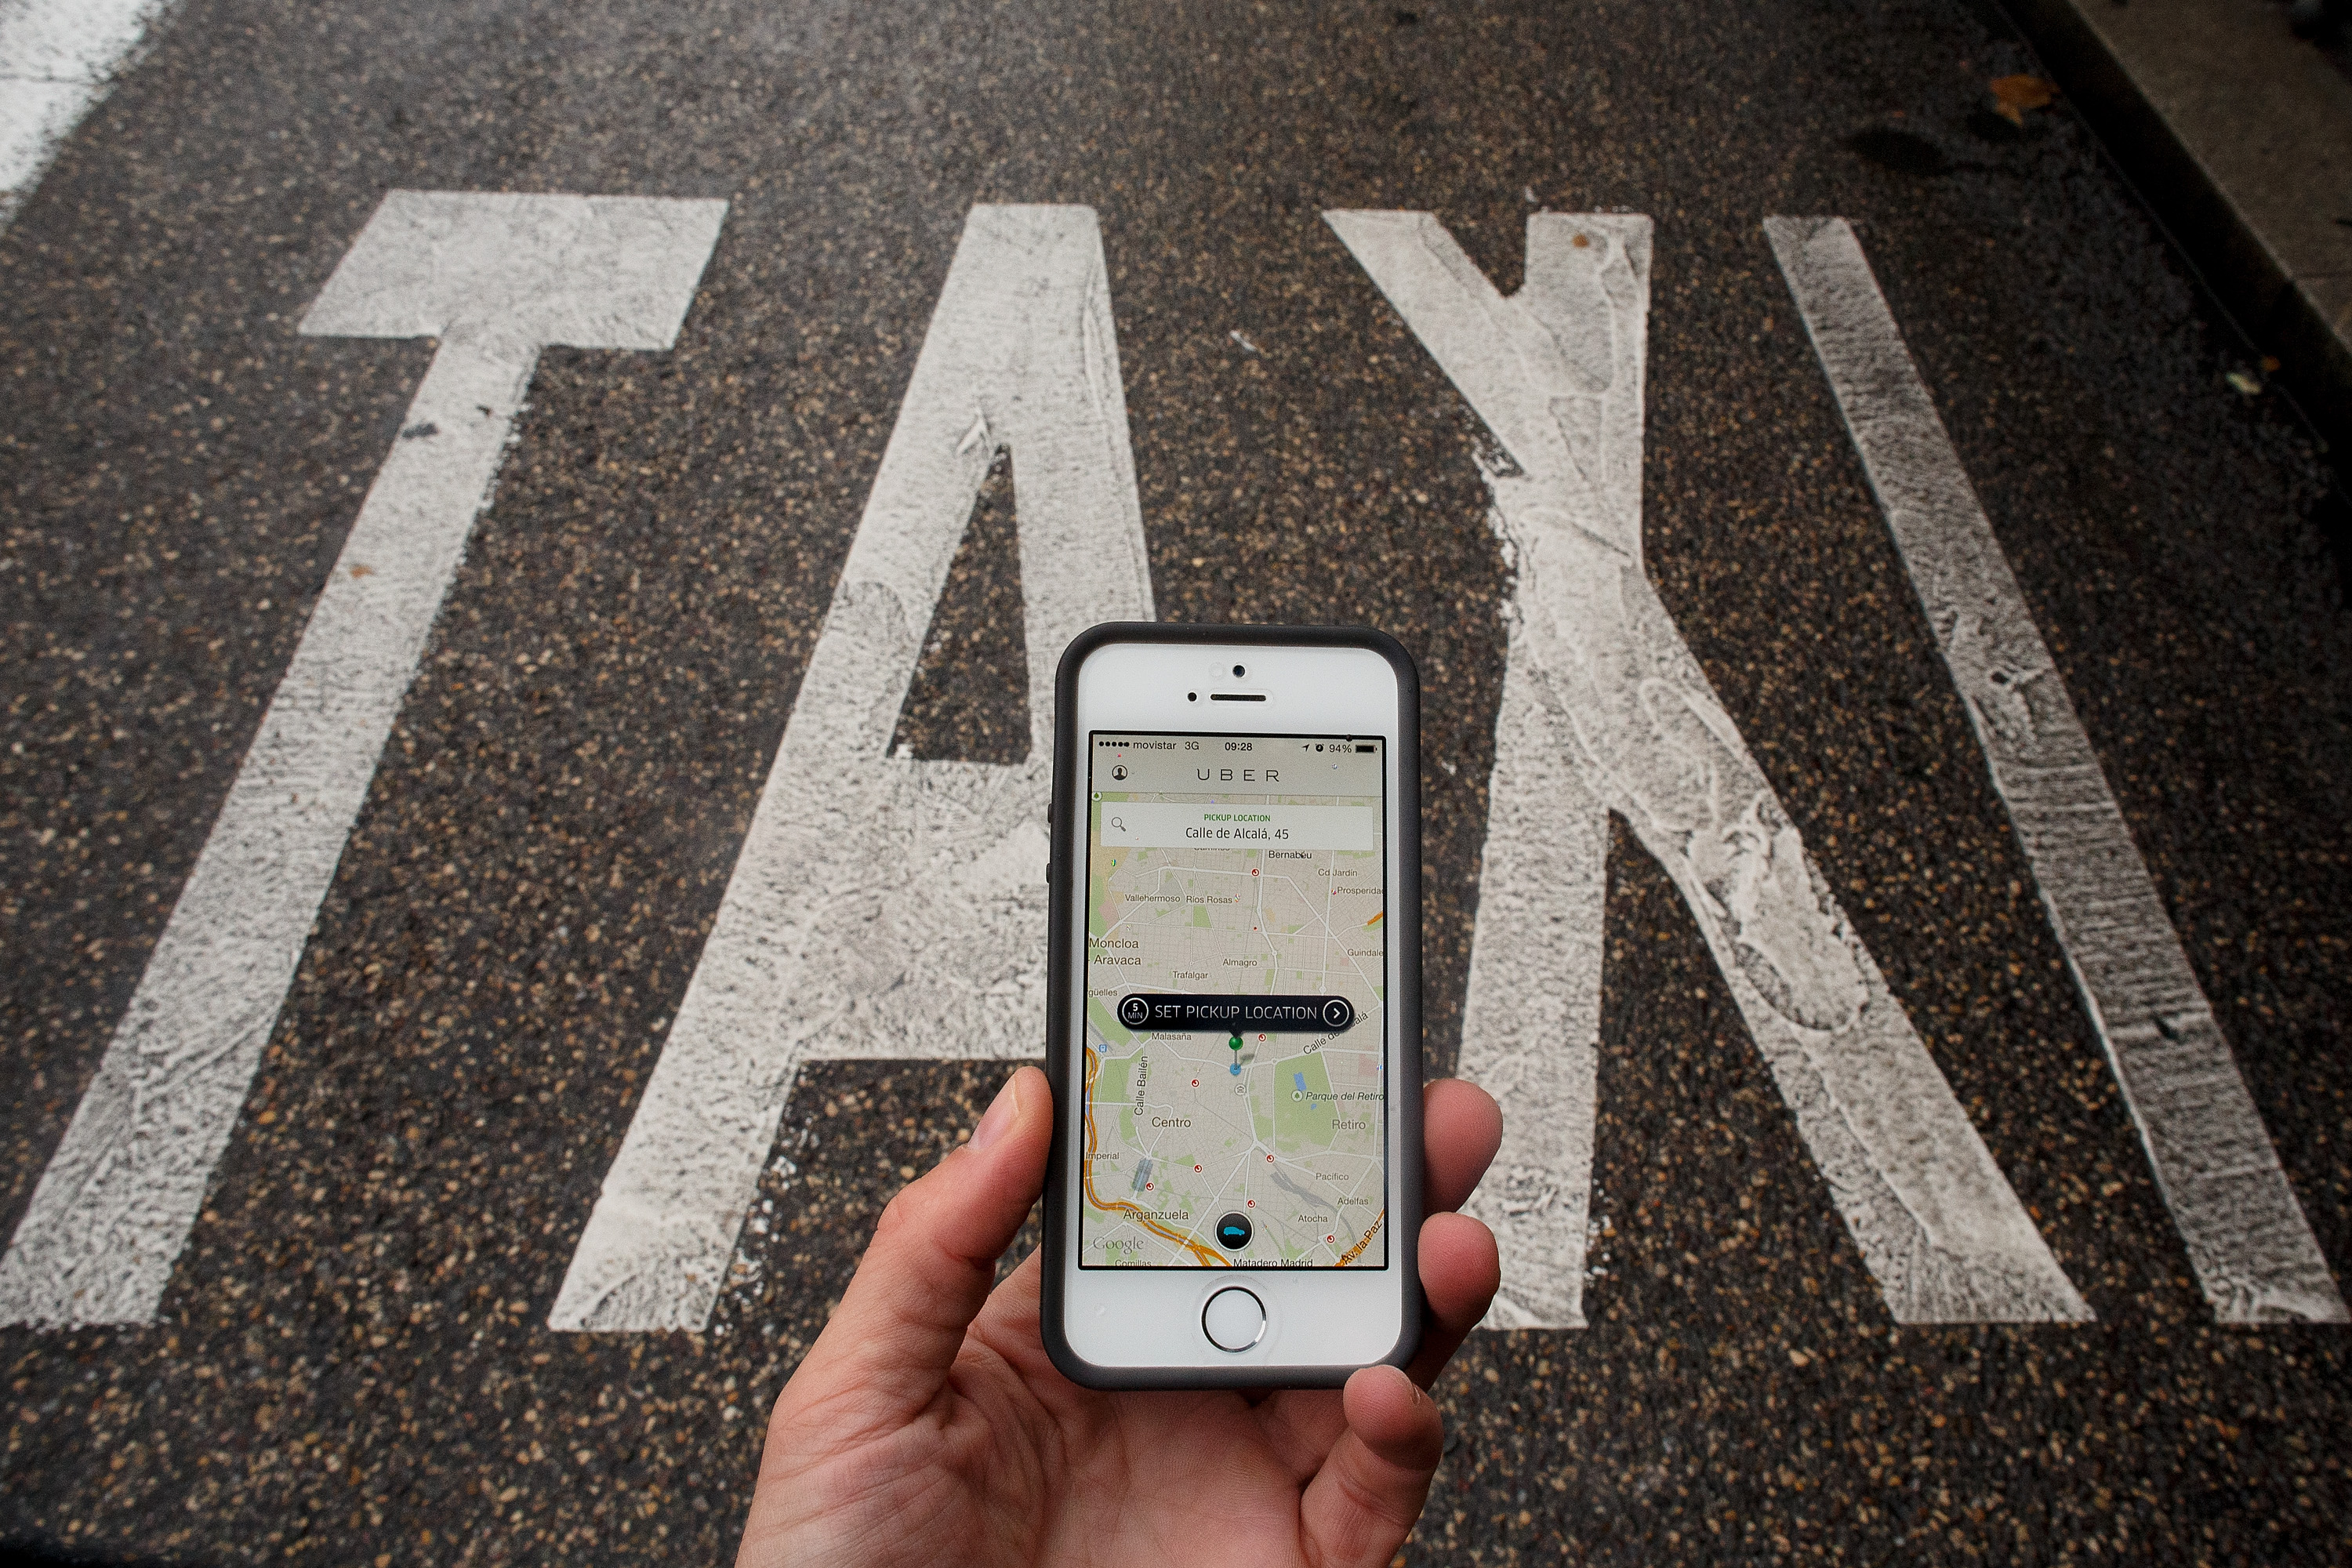 The battle between Uber and the taxi industry is likely to rage on. (Pablo Blazquez Dominguez/Getty Images)